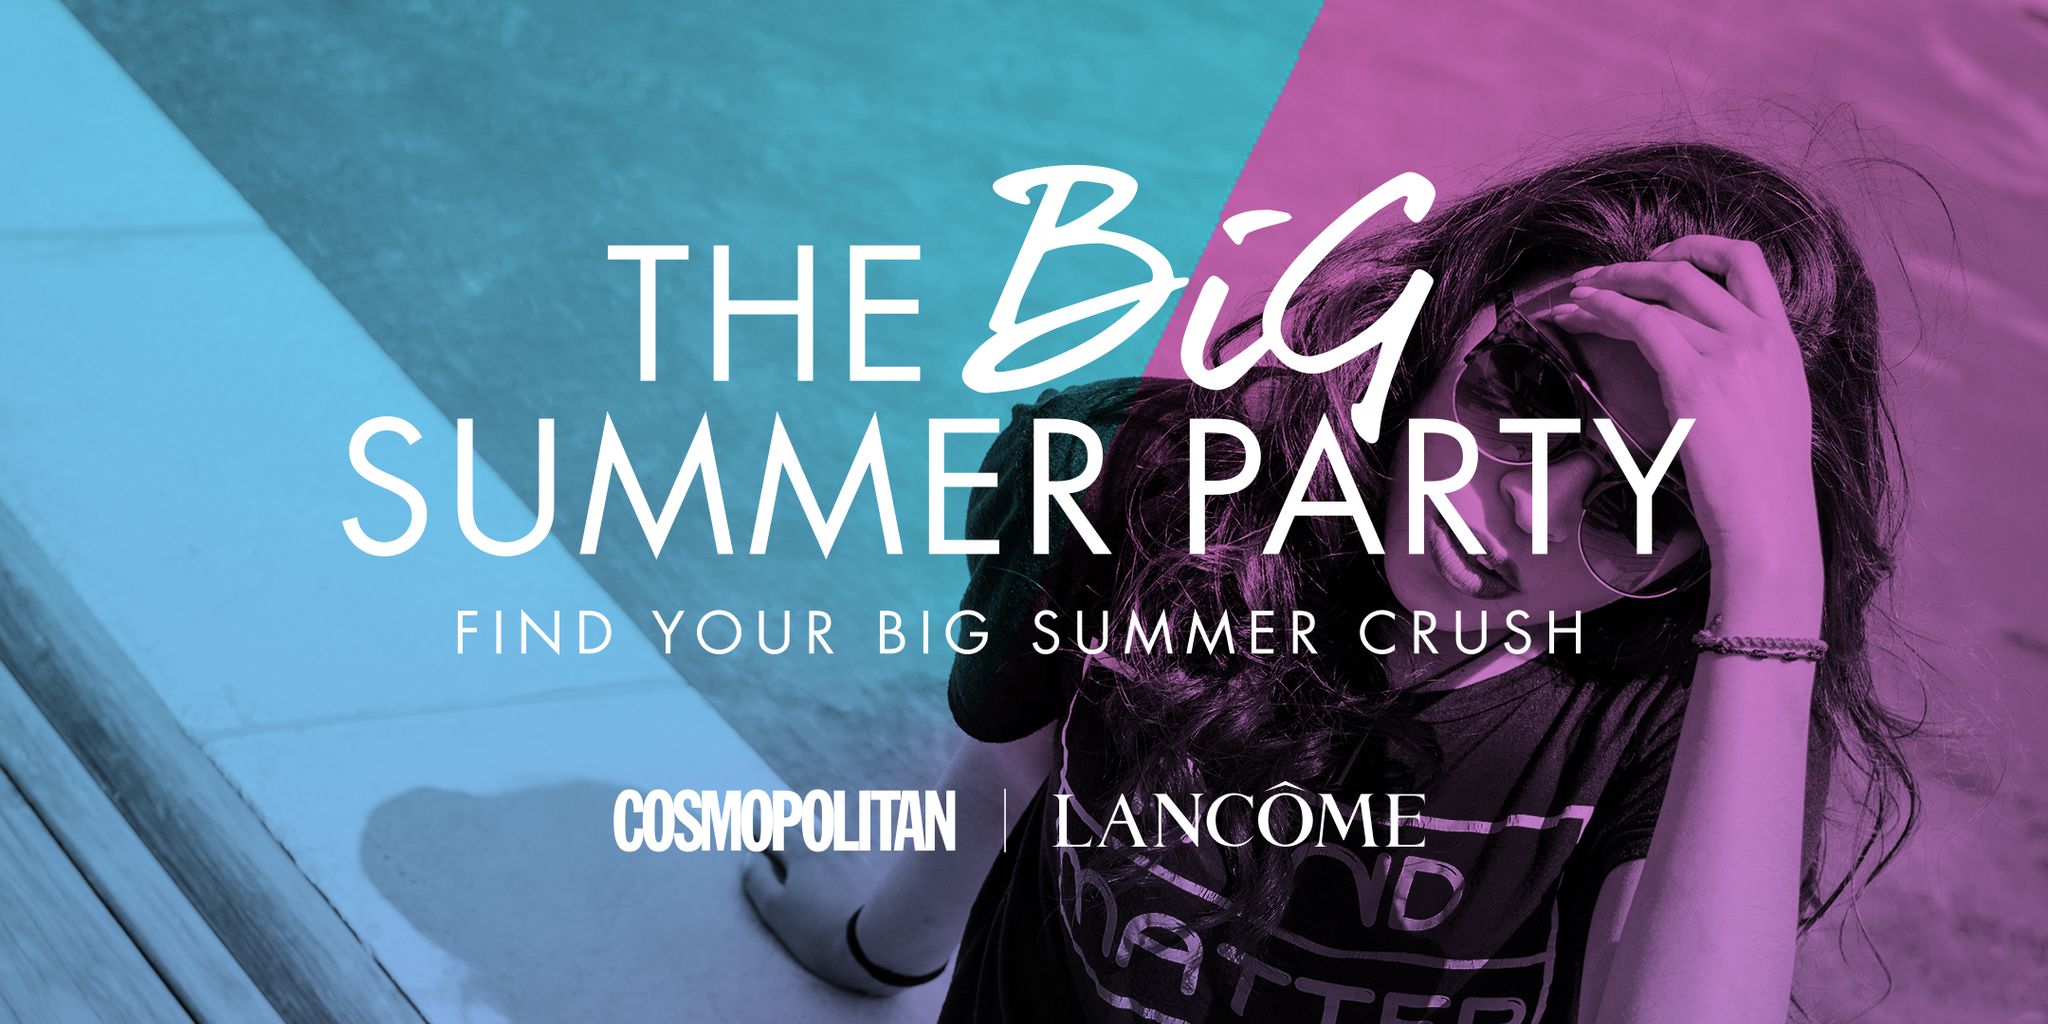 The Big Summer Party with Cosmopolitan & Lancome